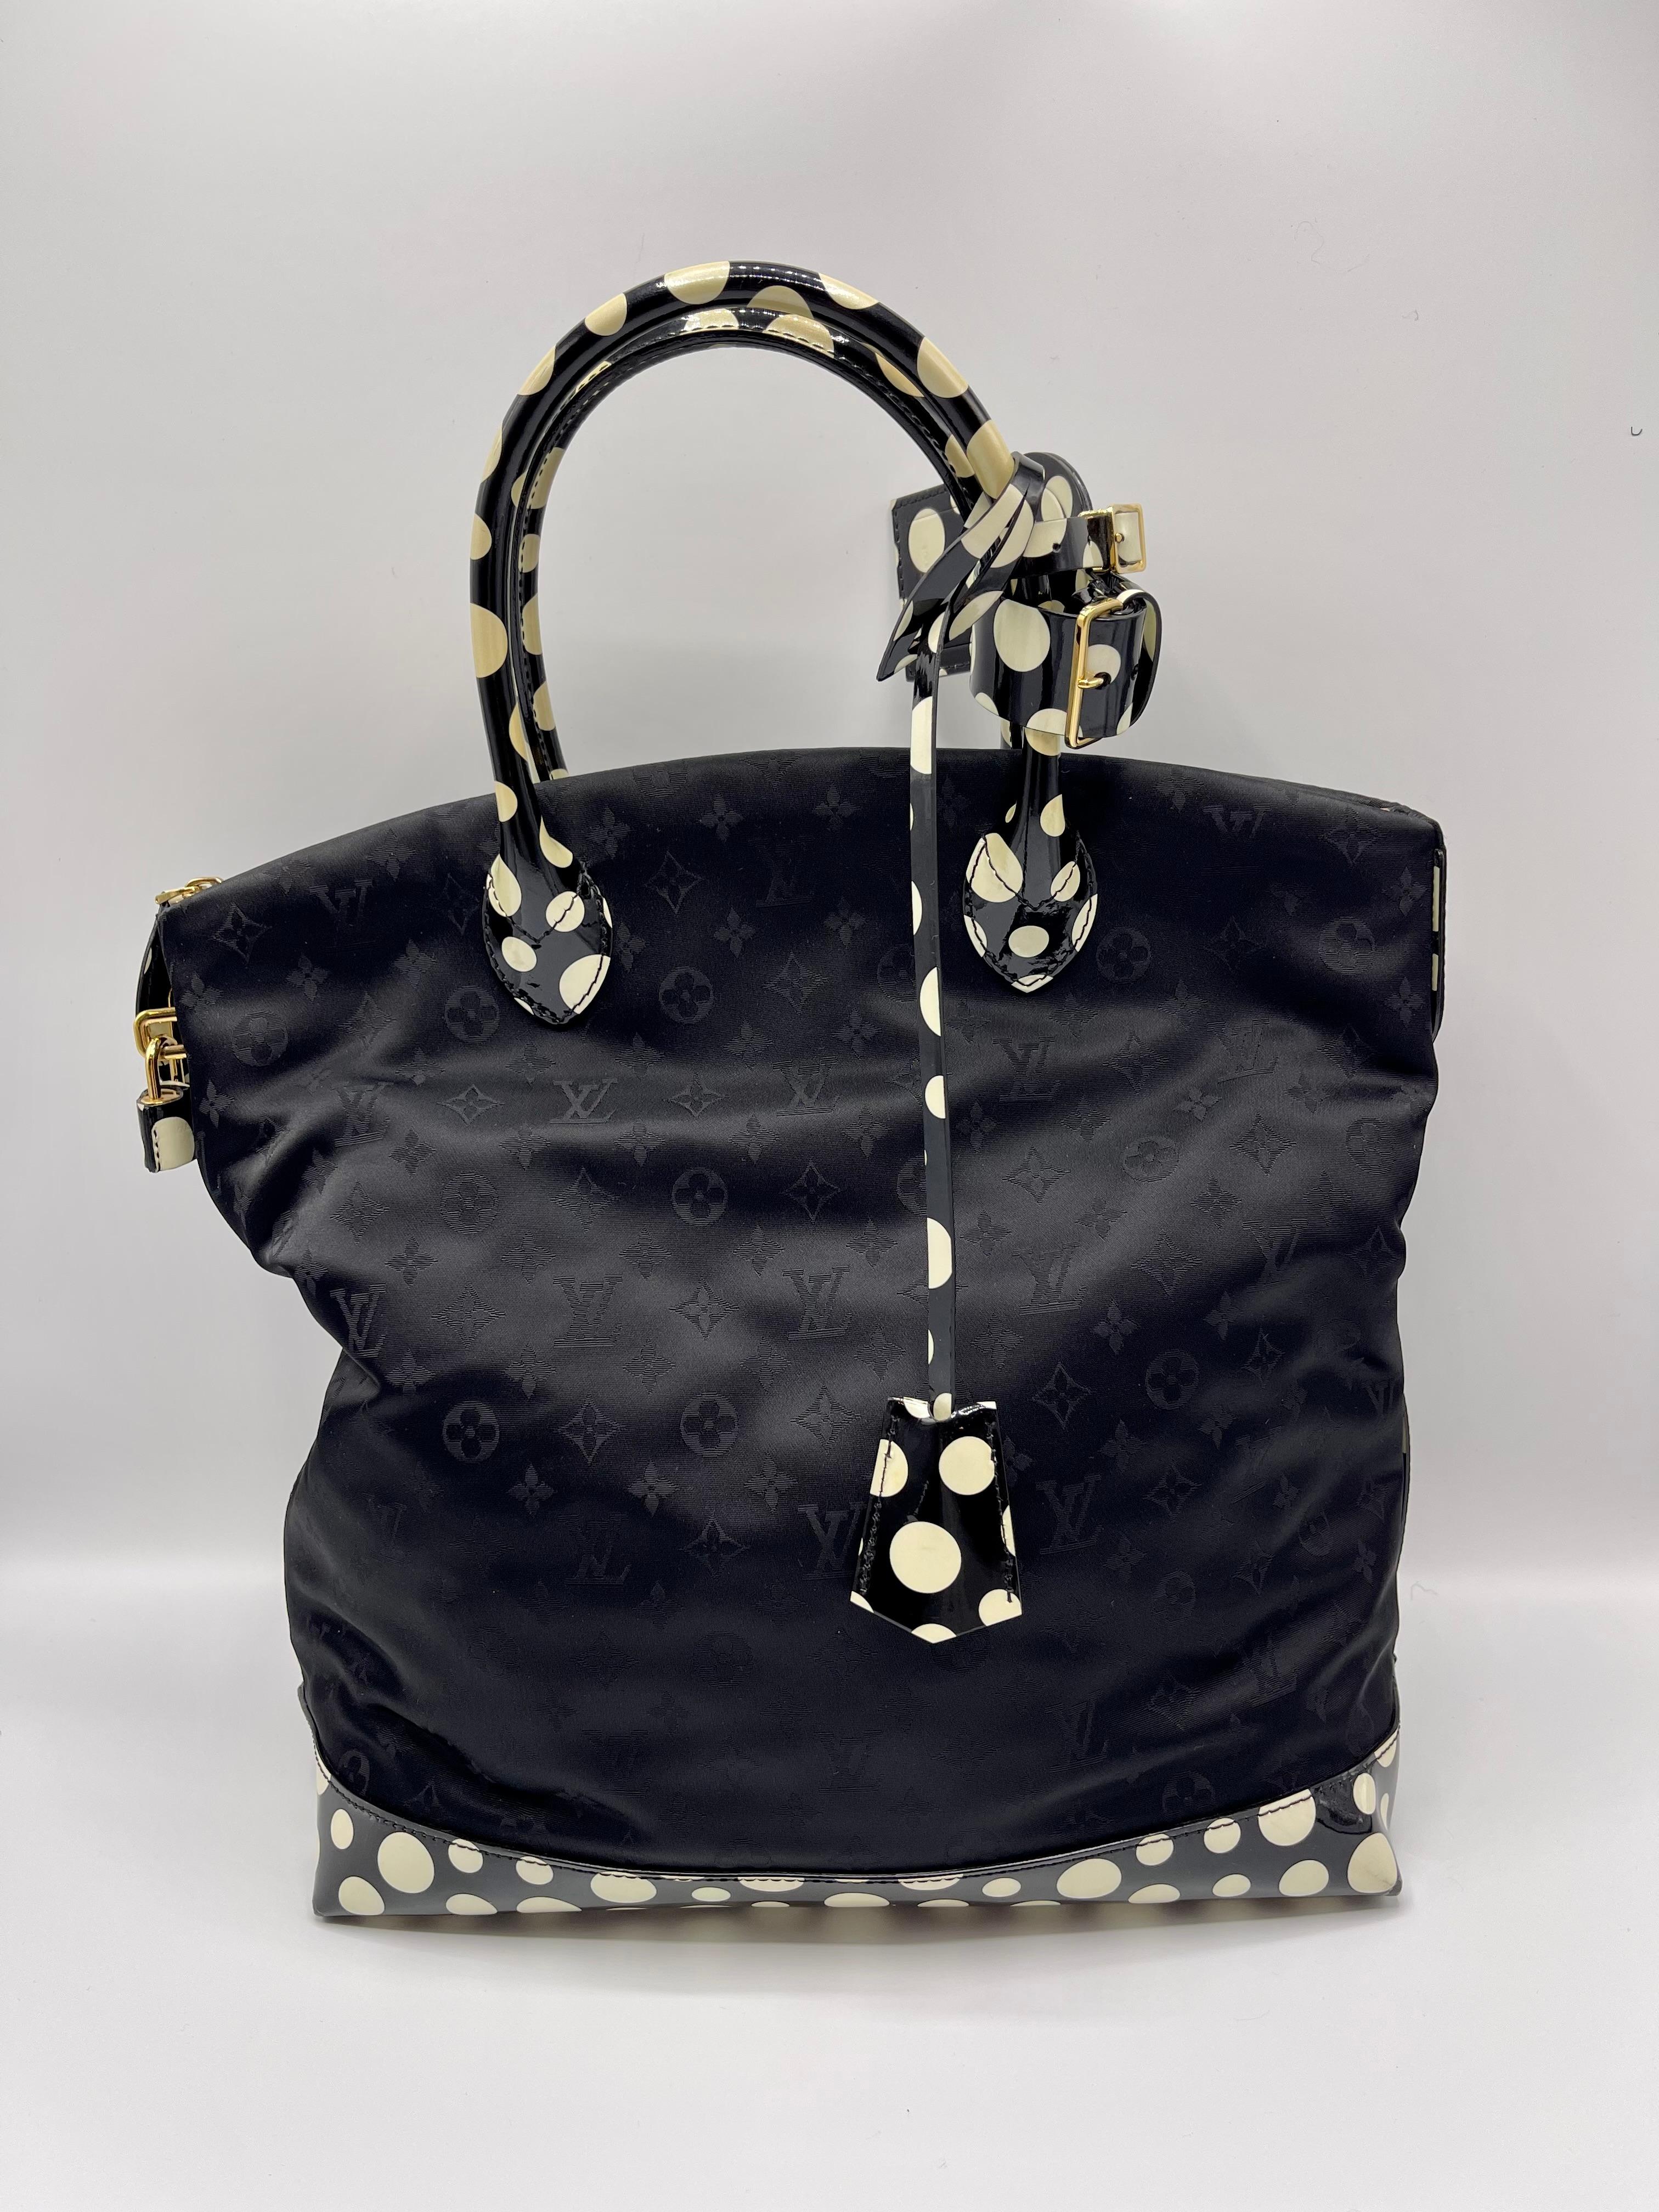 Yayoi Kusama Limited Edition Lockit Louis Vuitton Bag, in good condition.
This Lockit bag is made from black monogram nylon and features black and white polka dot patent leather handles, base, and trim. In addition, this bag includes a zip tip